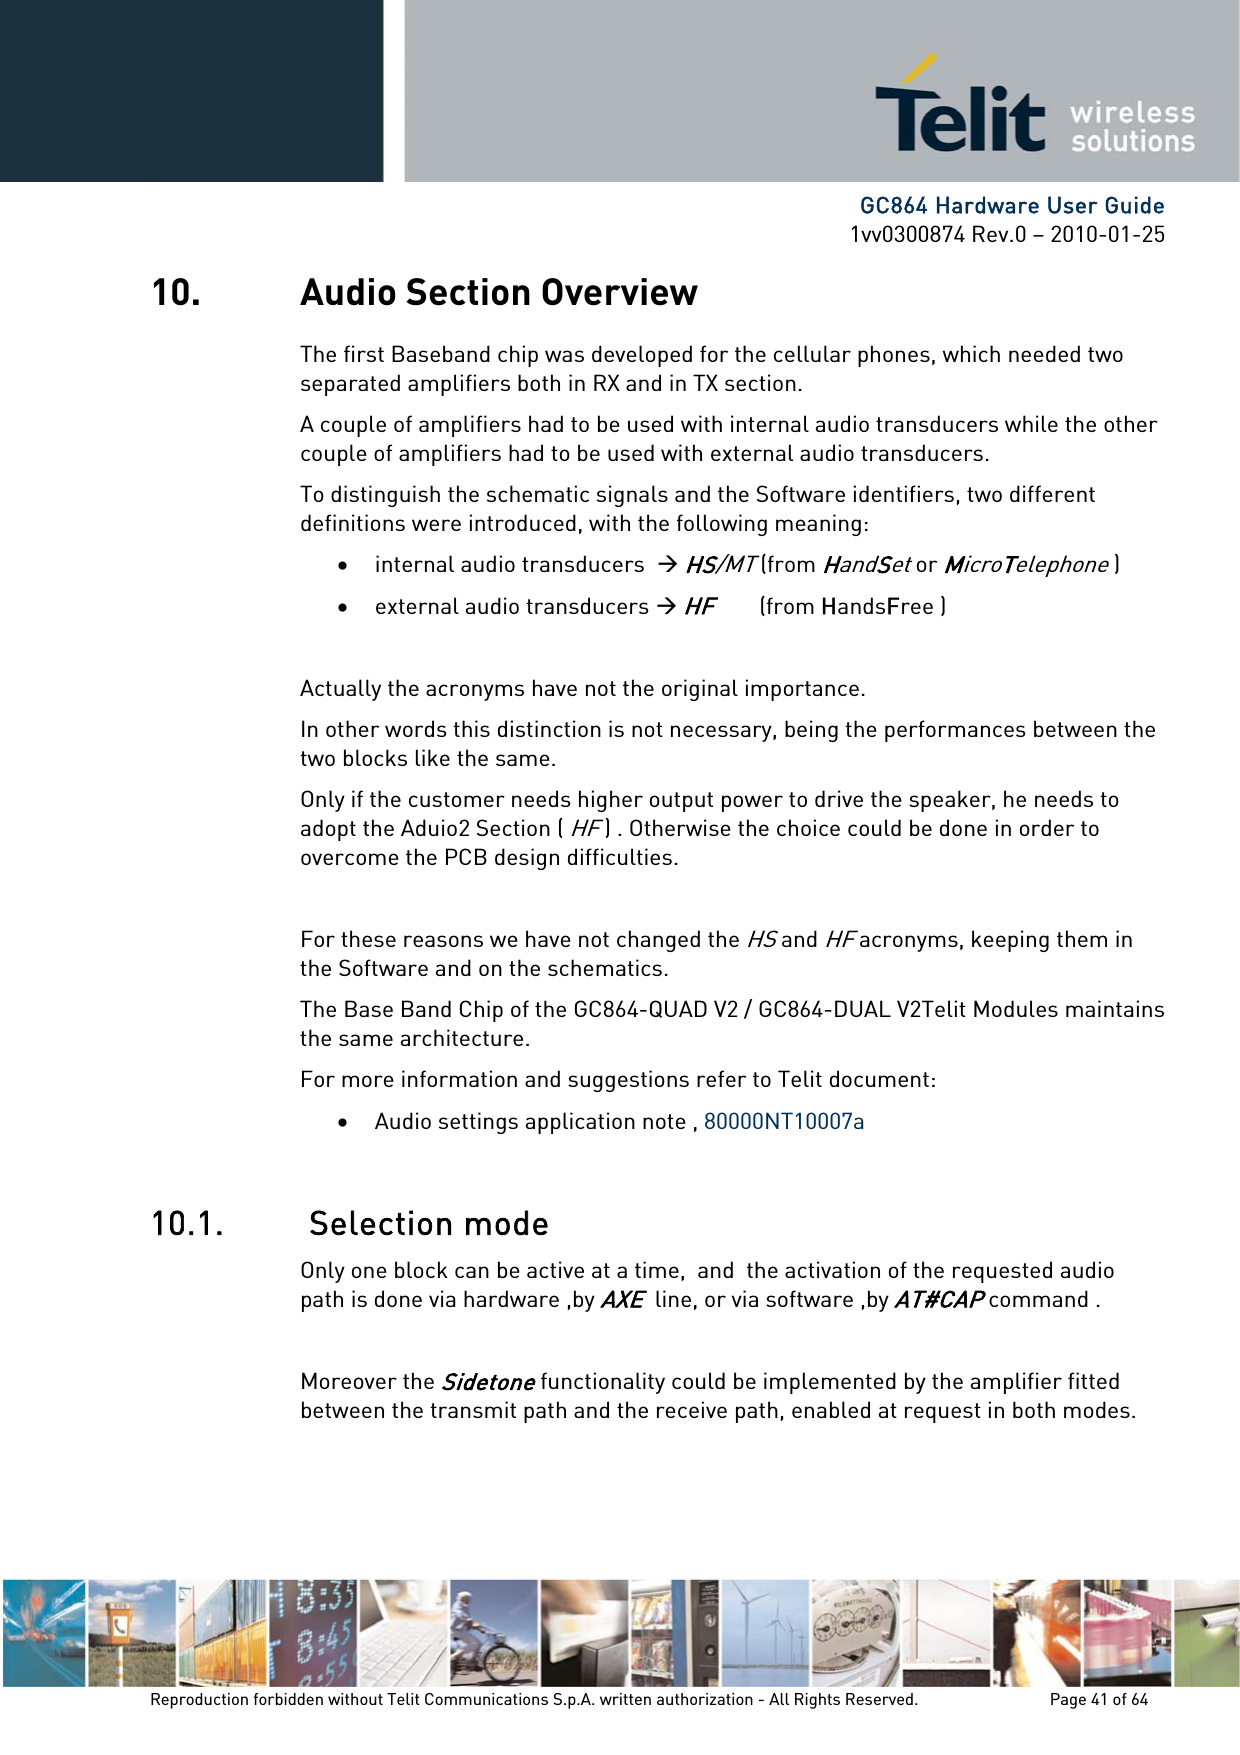      GC864 Hardware User Guide 1vv0300874 Rev.0 – 2010-01-25 Reproduction forbidden without Telit Communications S.p.A. written authorization - All Rights Reserved.    Page 41 of 64  10. Audio Section Overview The first Baseband chip was developed for the cellular phones, which needed two separated amplifiers both in RX and in TX section. A couple of amplifiers had to be used with internal audio transducers while the other couple of amplifiers had to be used with external audio transducers. To distinguish the schematic signals and the Software identifiers, two different definitions were introduced, with the following meaning: • internal audio transducers  Æ HS/MT (from HandSet or MicroTelephone ) • external audio transducers Æ HF        (from HandsFree )     Actually the acronyms have not the original importance.  In other words this distinction is not necessary, being the performances between the two blocks like the same. Only if the customer needs higher output power to drive the speaker, he needs to adopt the Aduio2 Section ( HF ) . Otherwise the choice could be done in order to overcome the PCB design difficulties.  For these reasons we have not changed the HS and HF acronyms, keeping them in the Software and on the schematics.  The Base Band Chip of the GC864-QUAD V2 / GC864-DUAL V2Telit Modules maintains the same architecture. For more information and suggestions refer to Telit document: • Audio settings application note , 80000NT10007a  10.1.  Selection mode Only one block can be active at a time,  and  the activation of the requested audio path is done via hardware ,by AXE  line, or via software ,by AT#CAP command .   Moreover the Sidetone functionality could be implemented by the amplifier fitted between the transmit path and the receive path, enabled at request in both modes.   